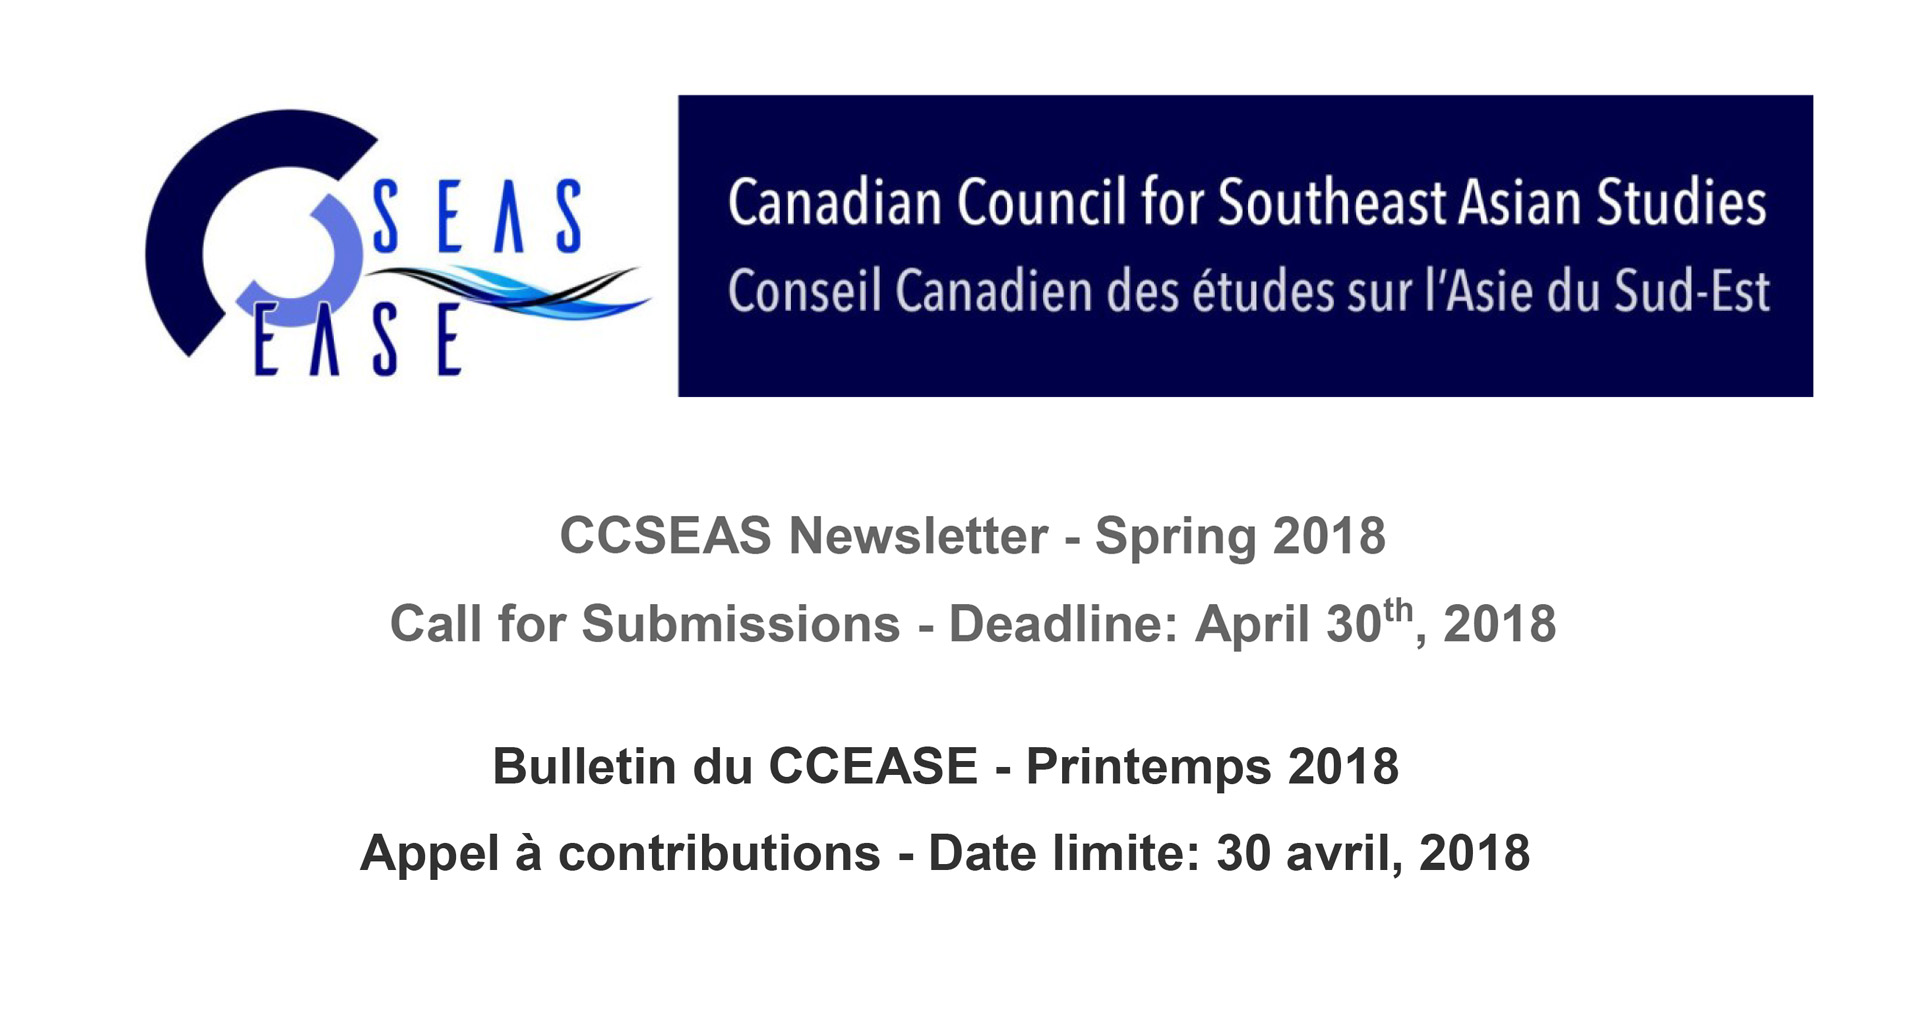 CCSEAS/CCEASE Call for Submissions/Appel à contributions